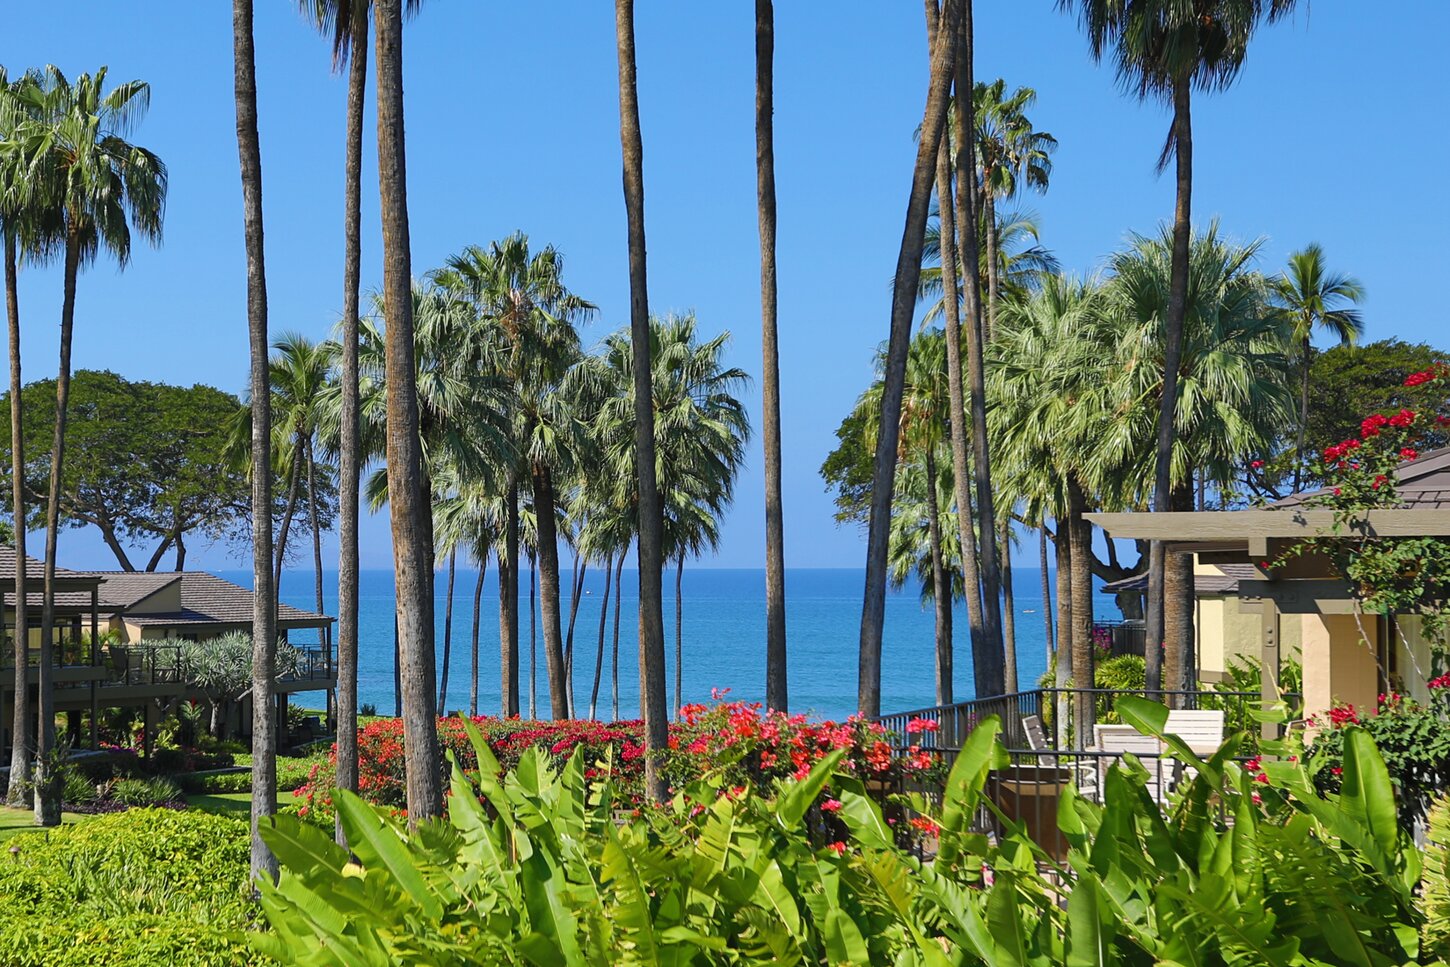 Your view from our lanai (patio)!